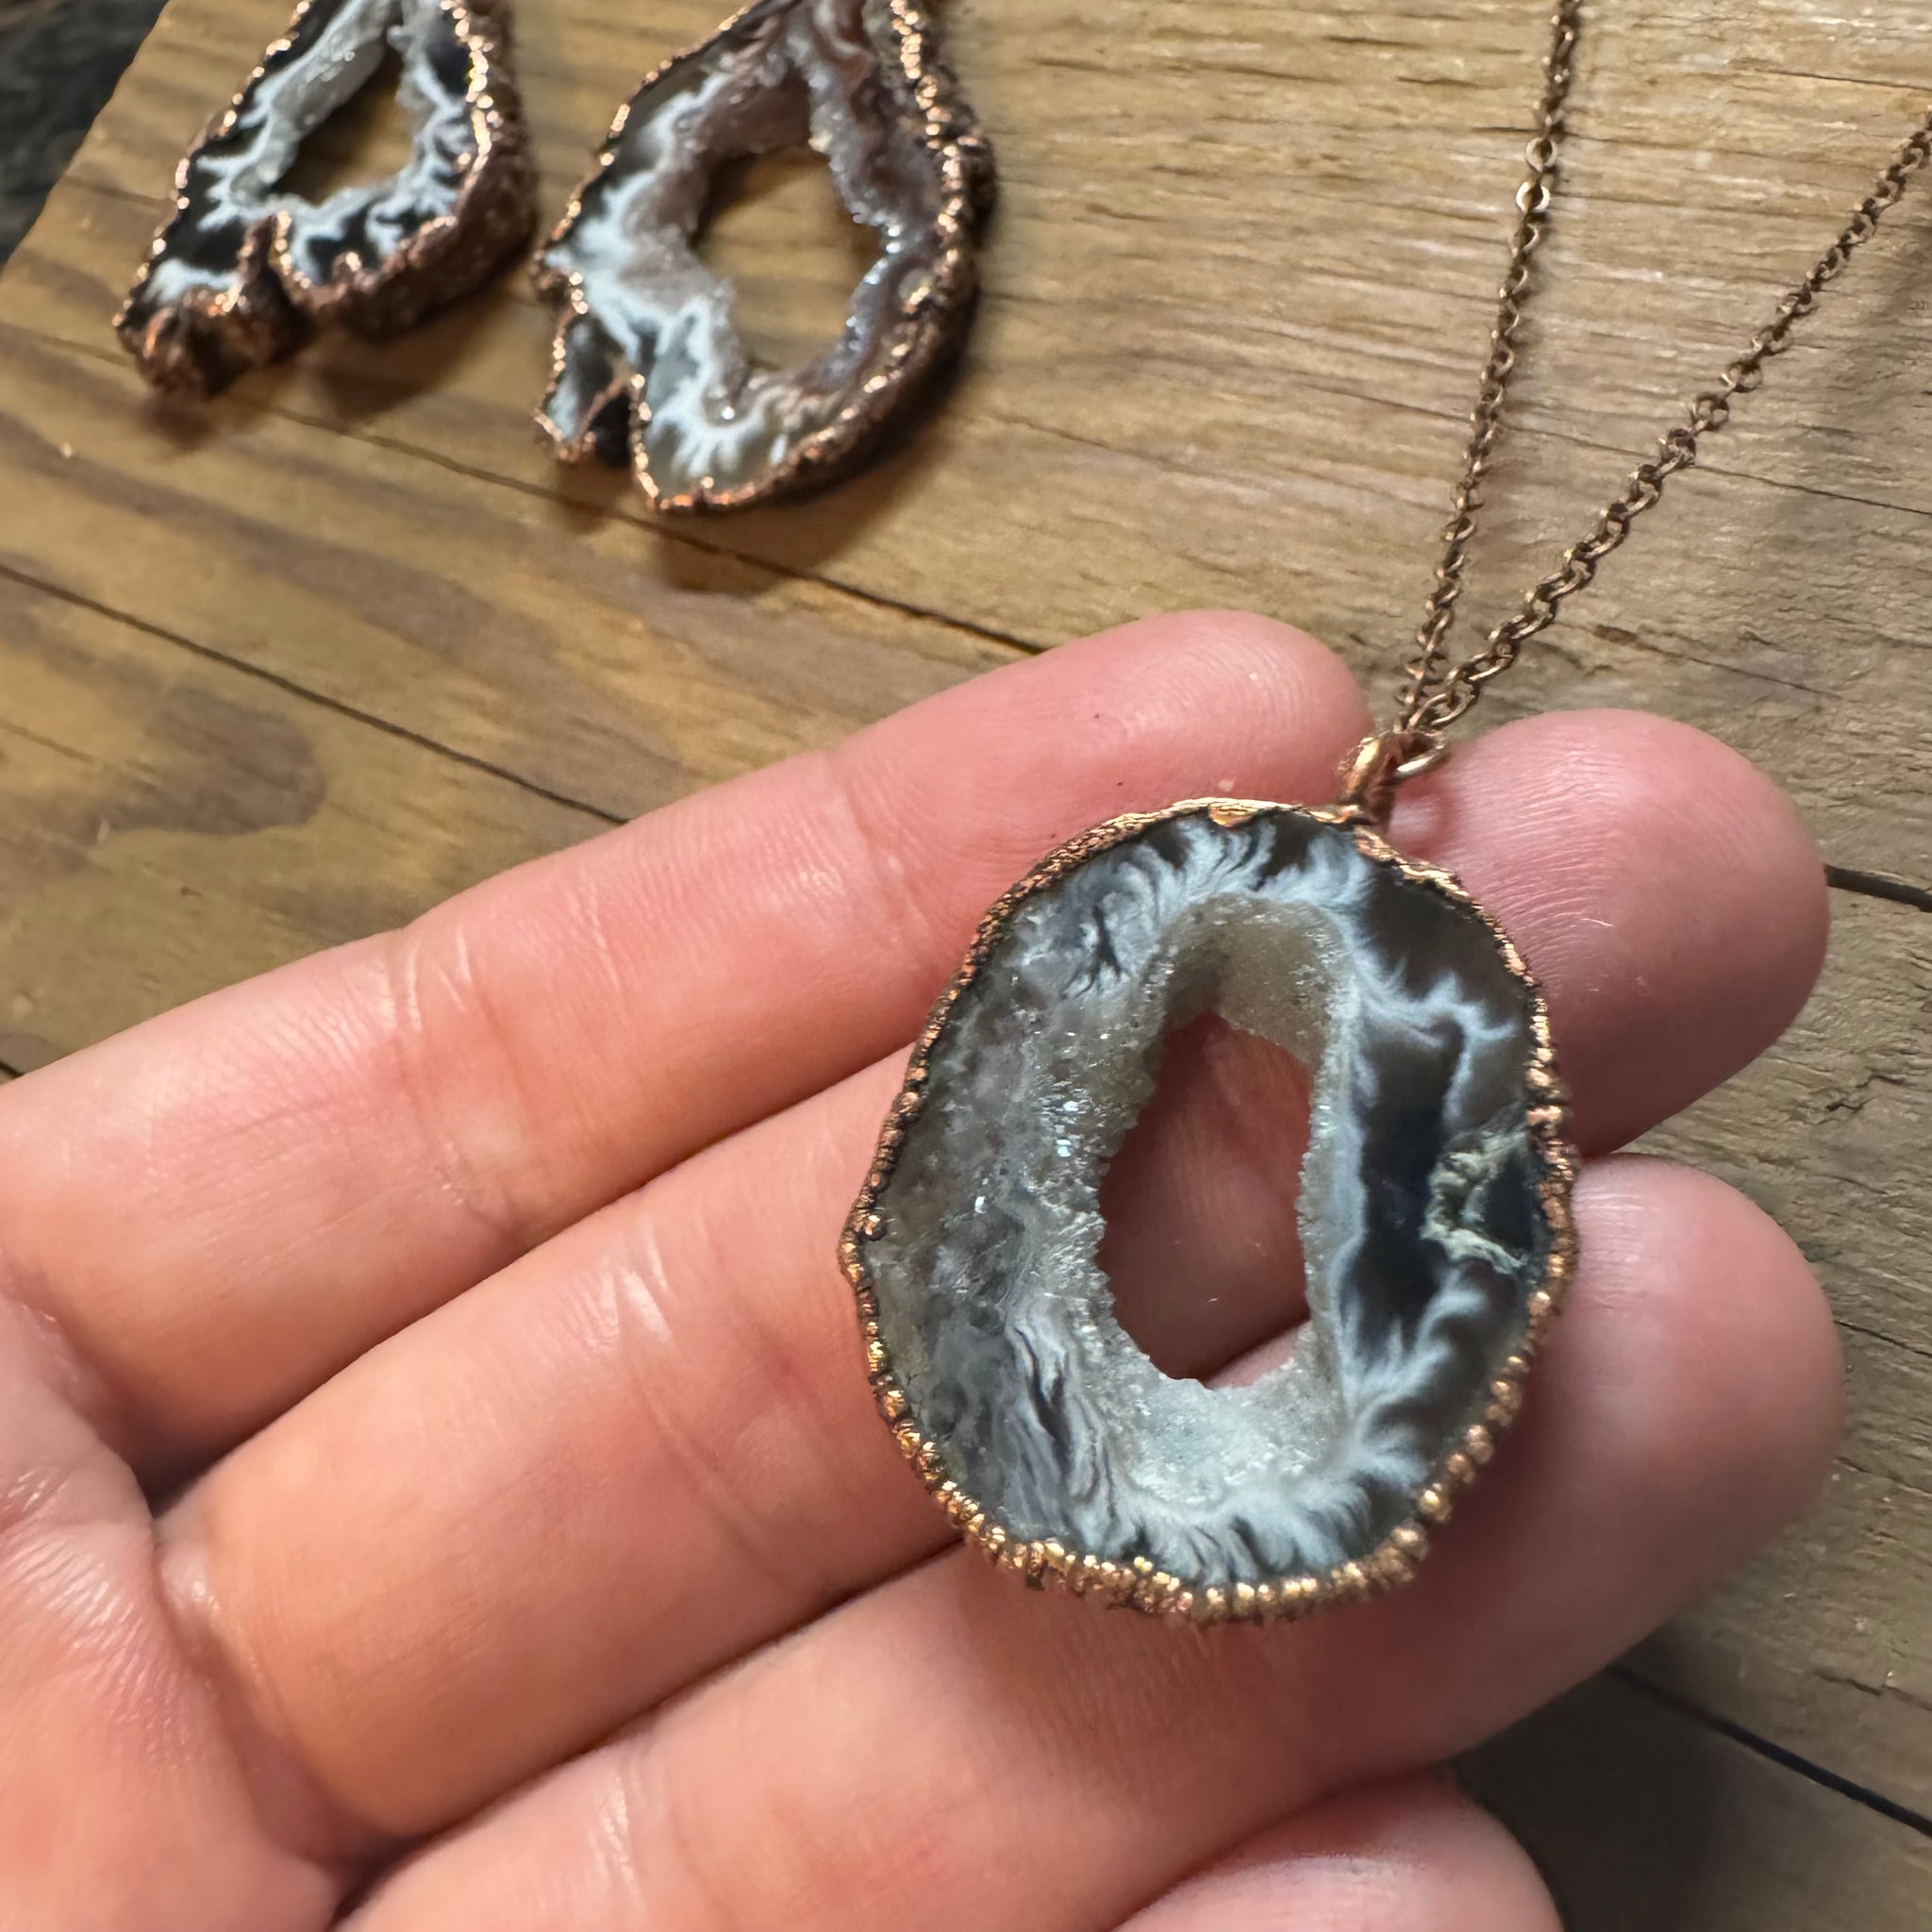 24" Fine Druzy Geode Necklace on Copper Chain by Hawkhouse